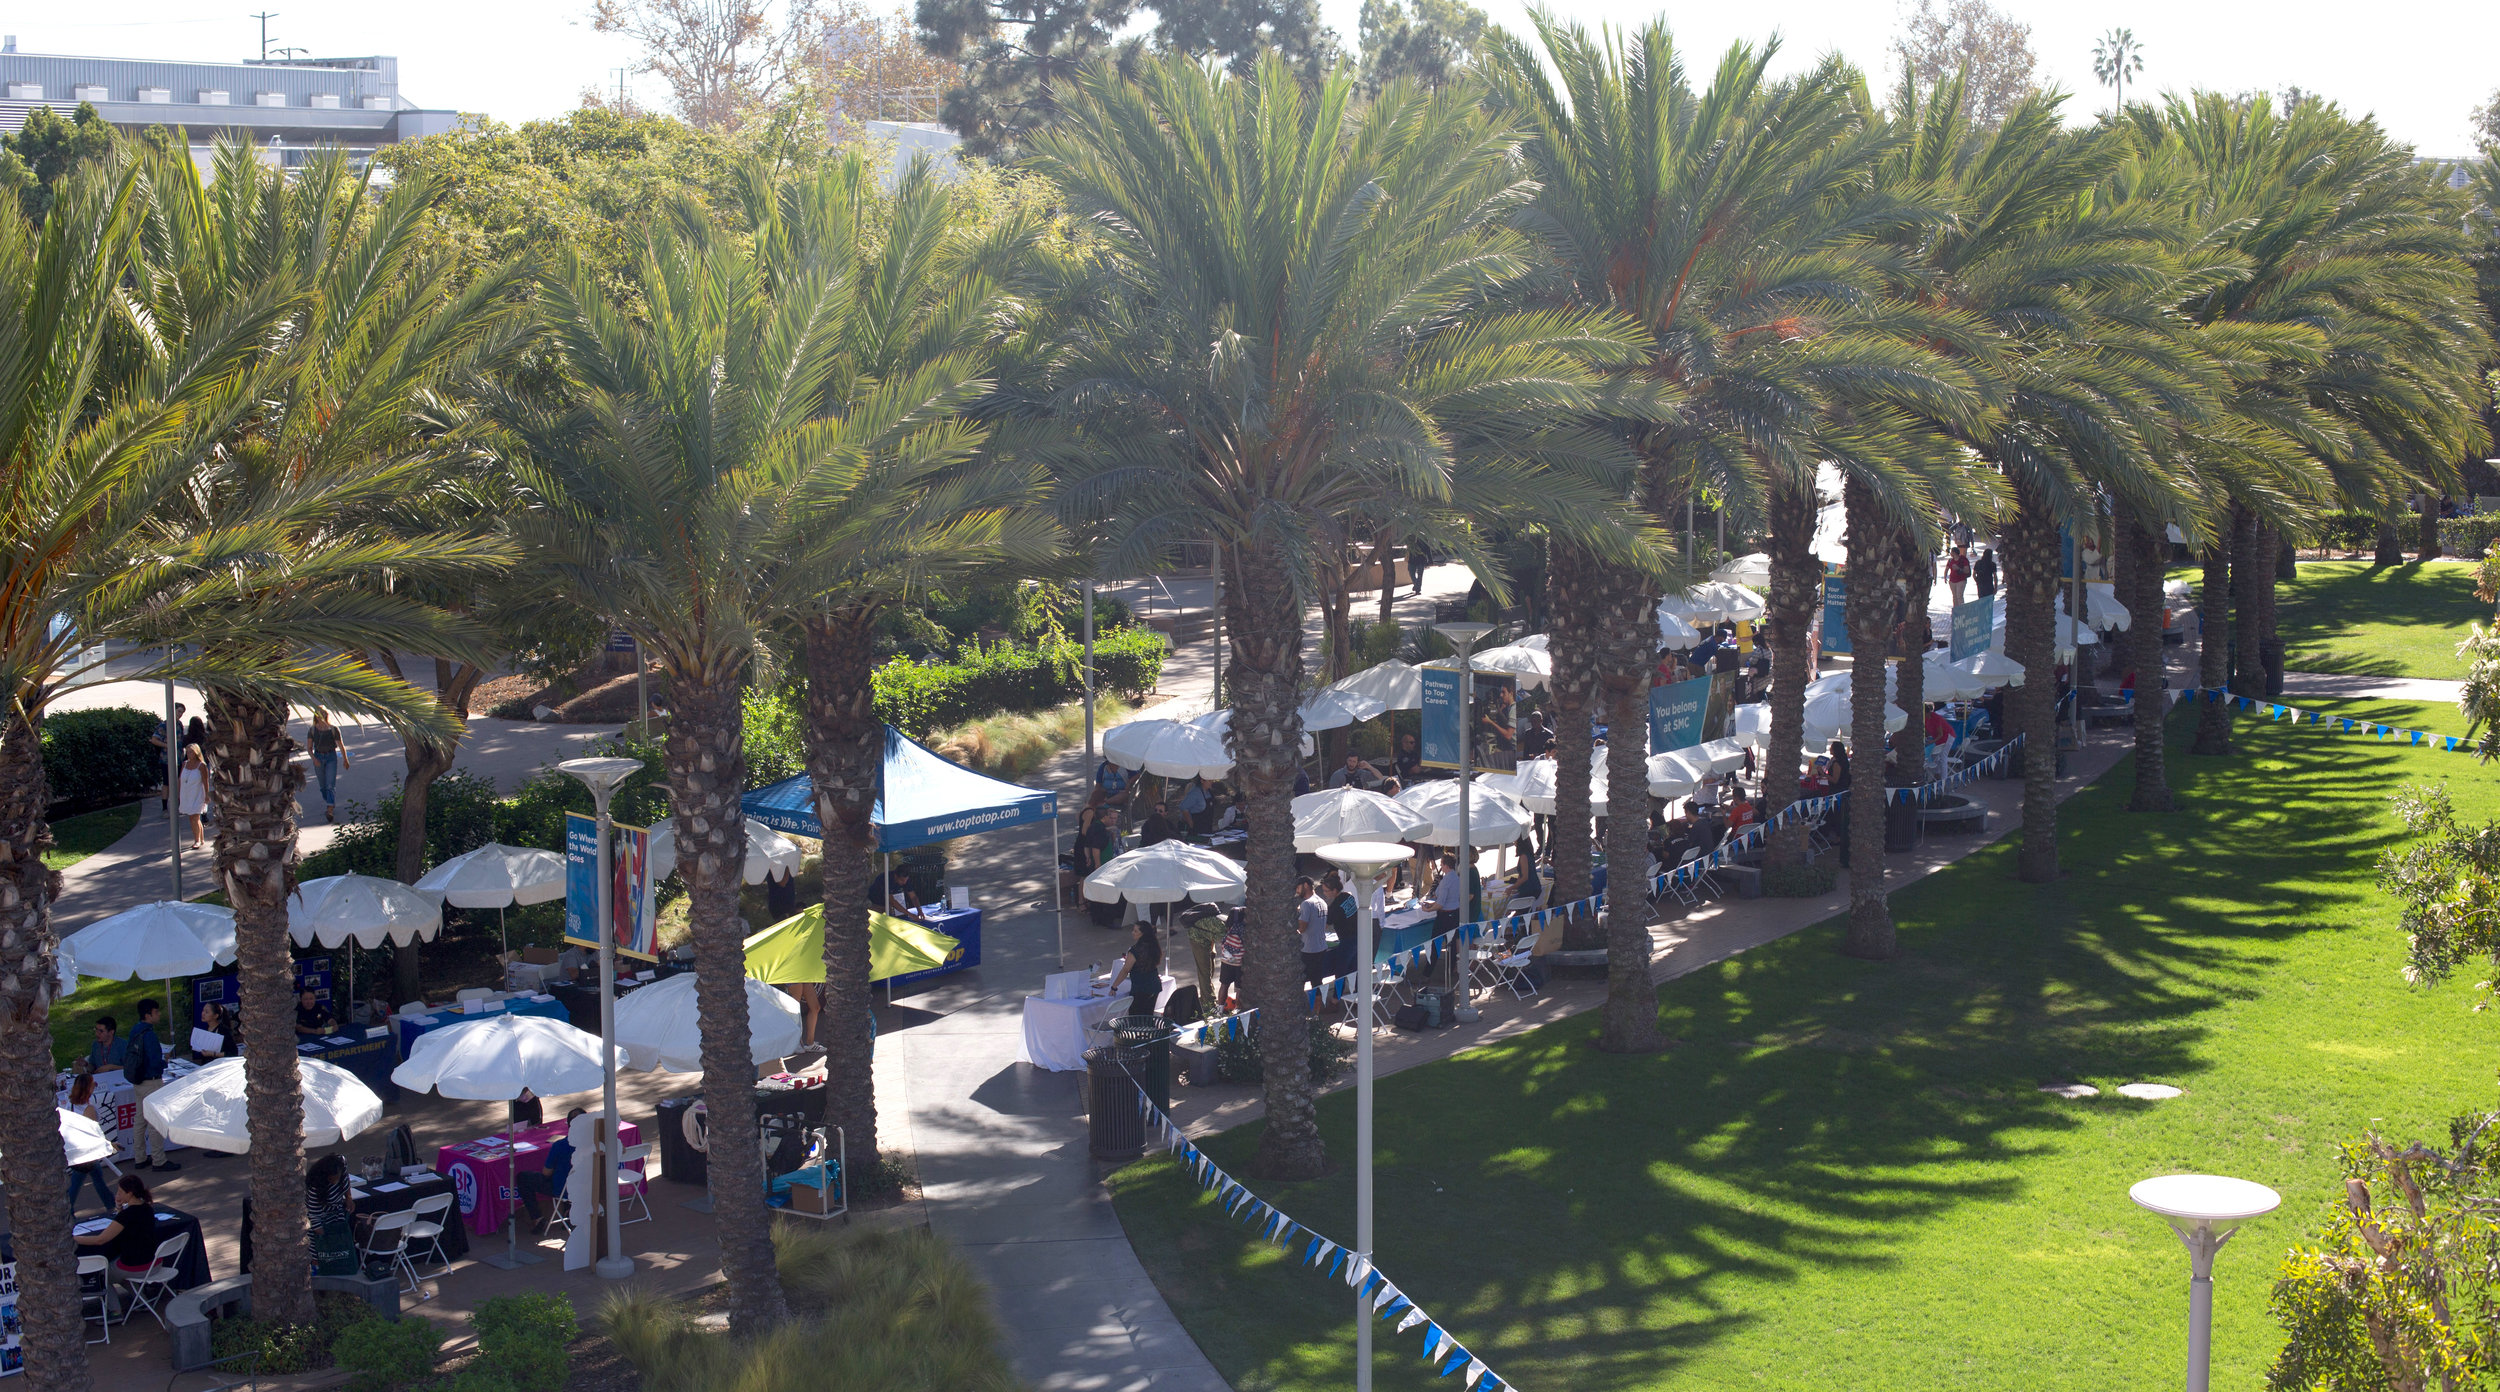  Multiple employers lined up under white umbrellas at the Job Fair on the Main Quad of the Main Campus in Santa Monica College in Santa Monica, Calif., October 24, 2017. (Photo By: Ripsime Avetisyan/Corsair Staff) 